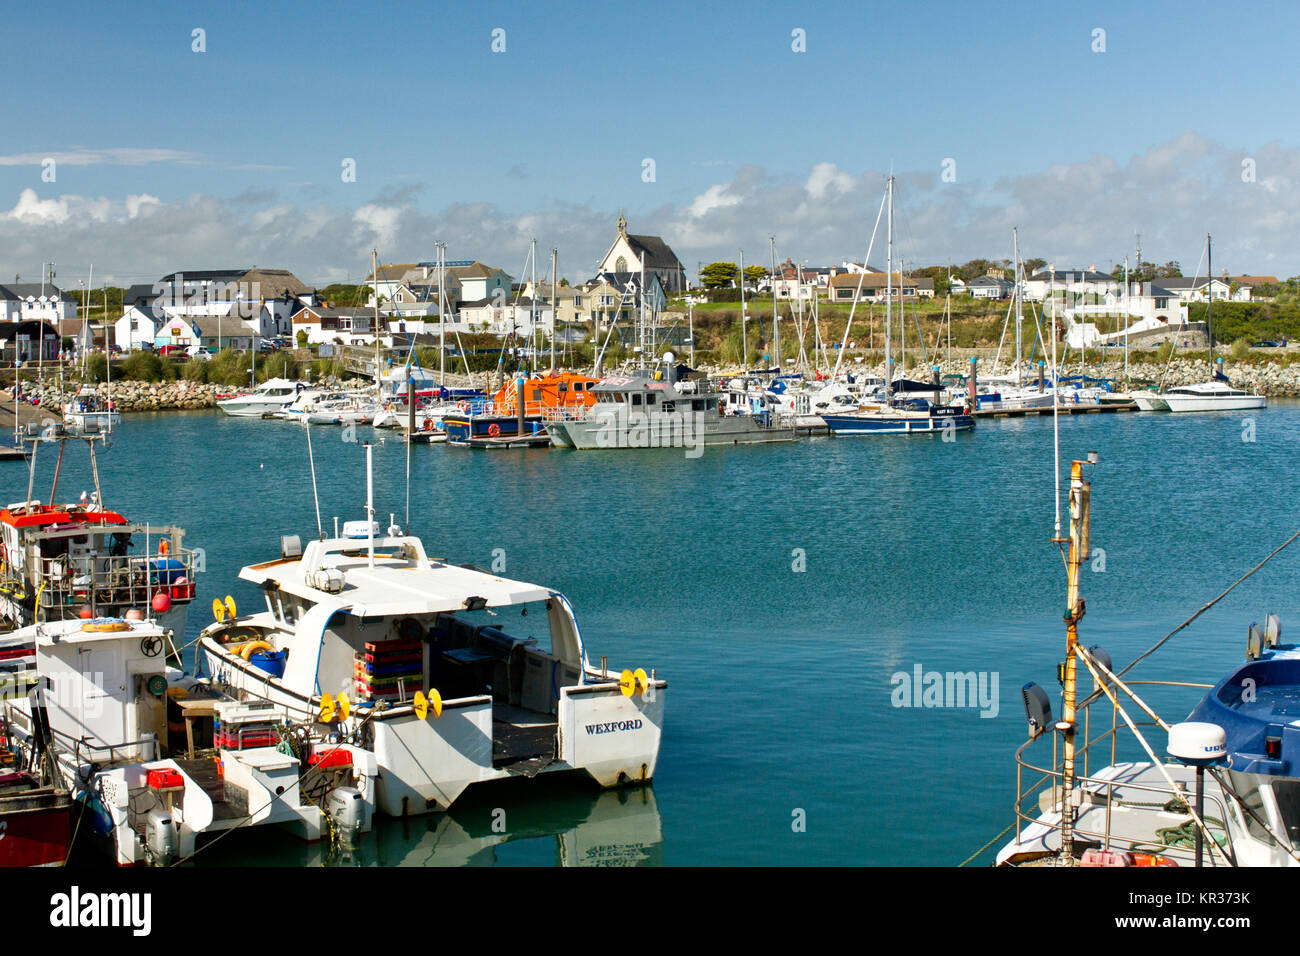 Beautiful little port town in Wexford, Ireland with a view on the local fishermen boats and yachts Stock Photo